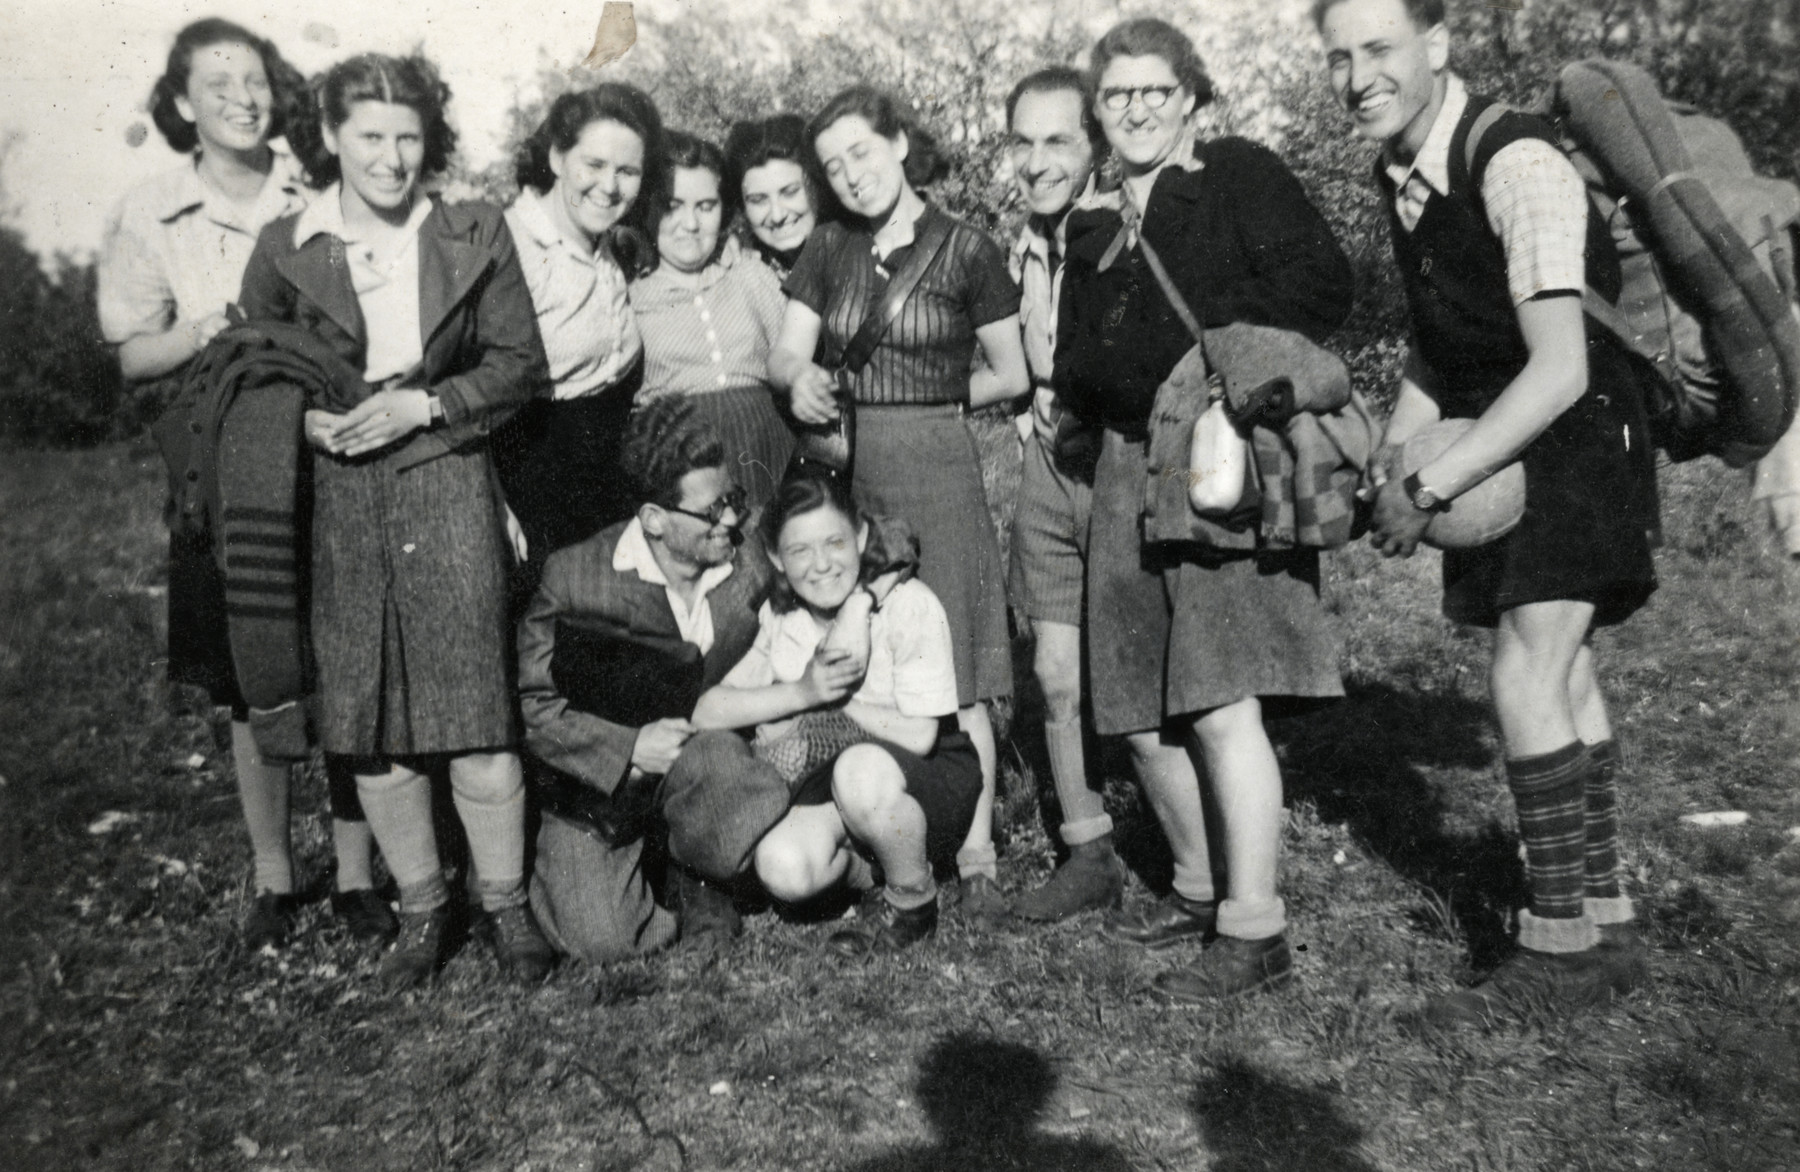 Zionist youth gather at a Shomer Hatzair summer camp in Budapest.

Esther Schaechter is second from the left.